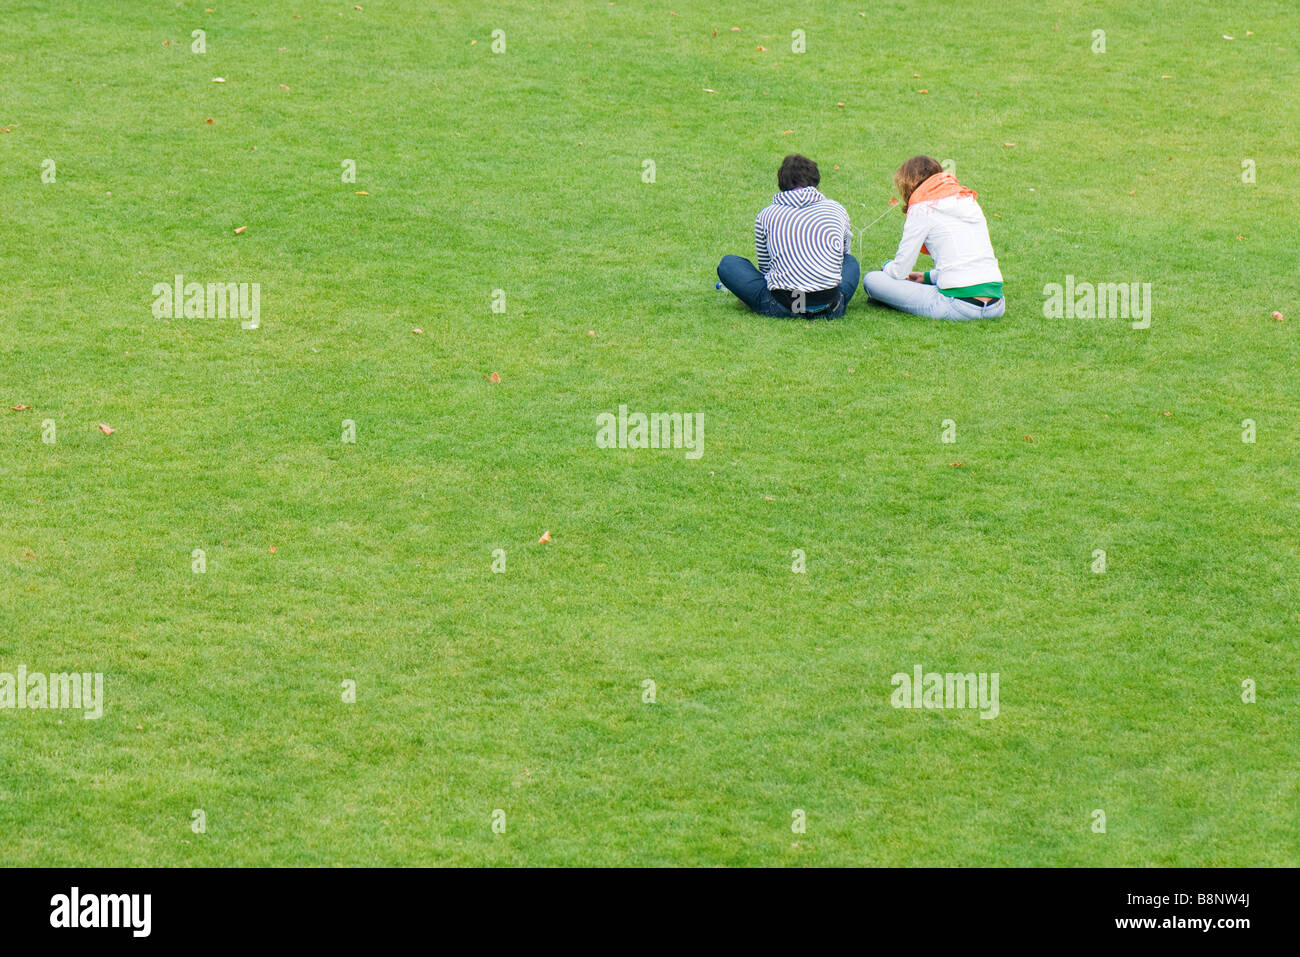 Young couple sitting side by side on lawn, rear view Stock Photo